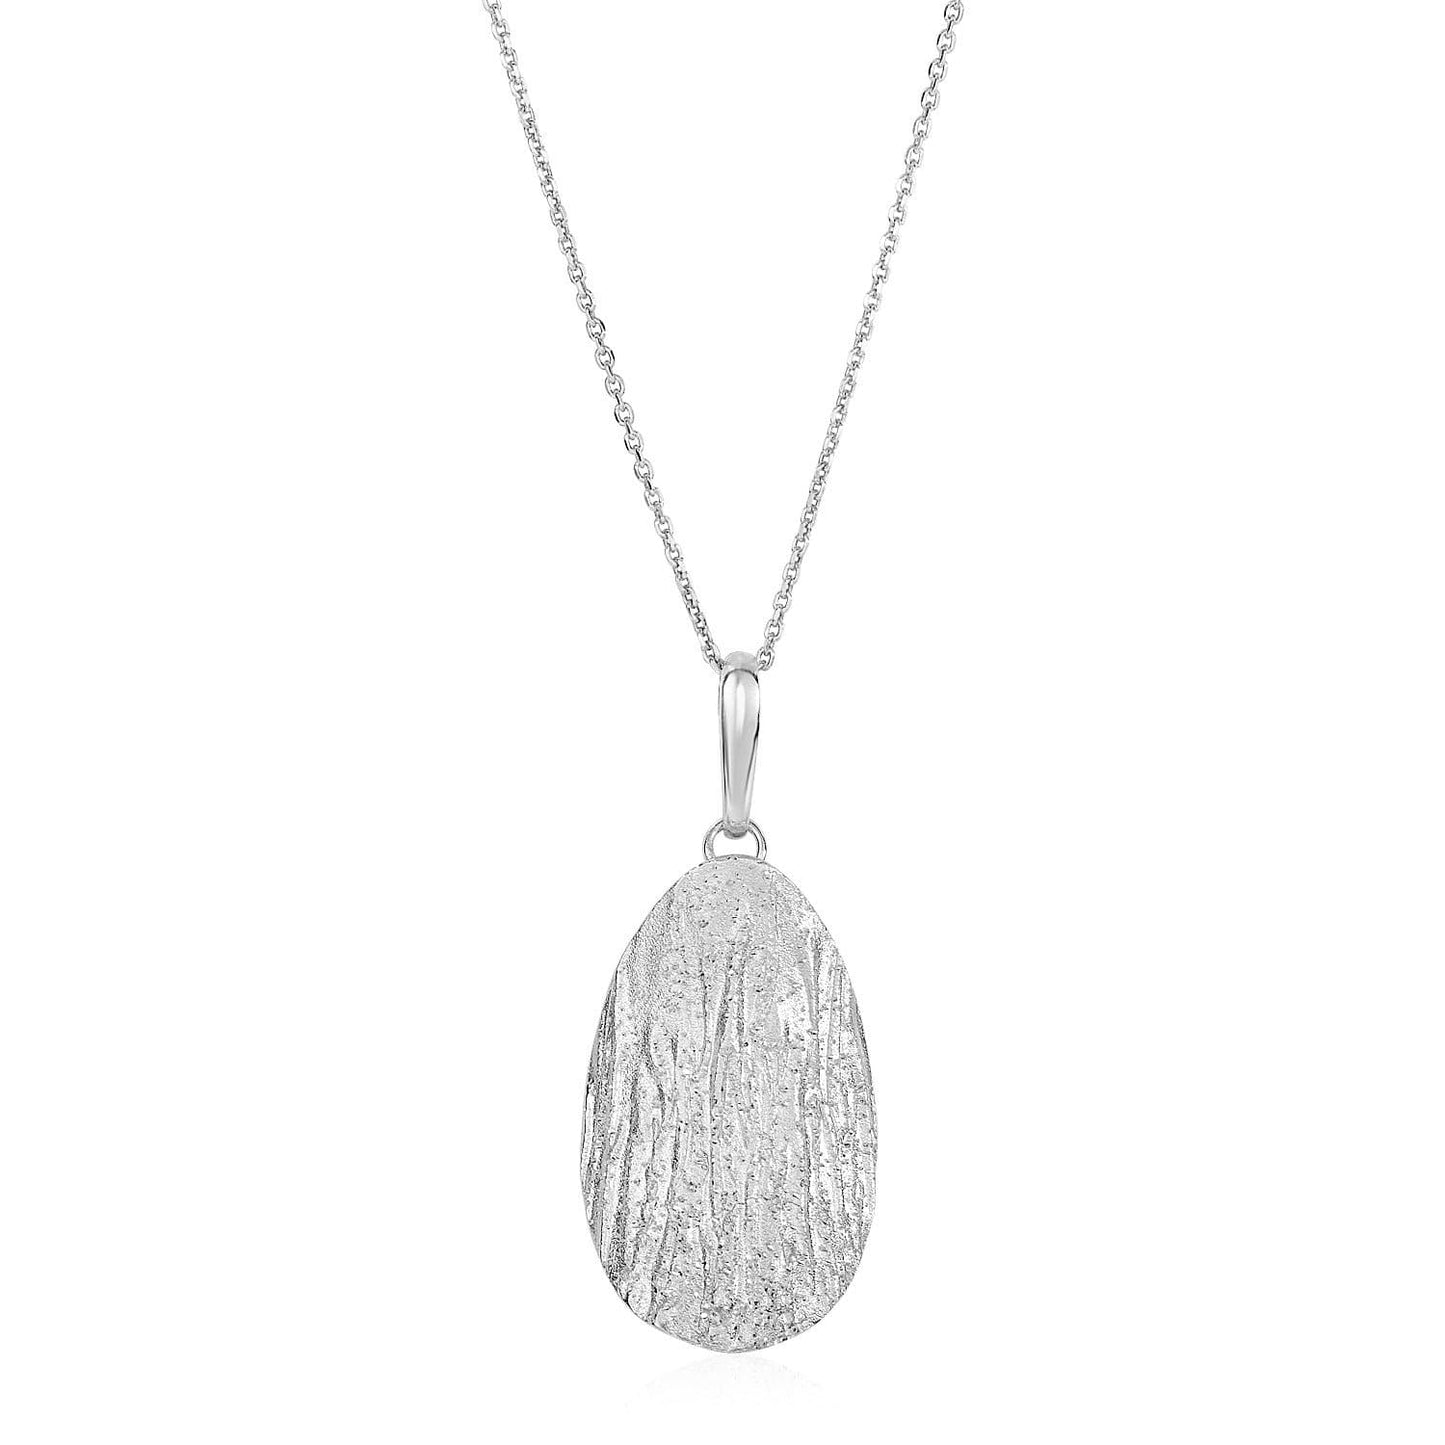 Textured Oval Pendant with White Finish in Sterling Silver